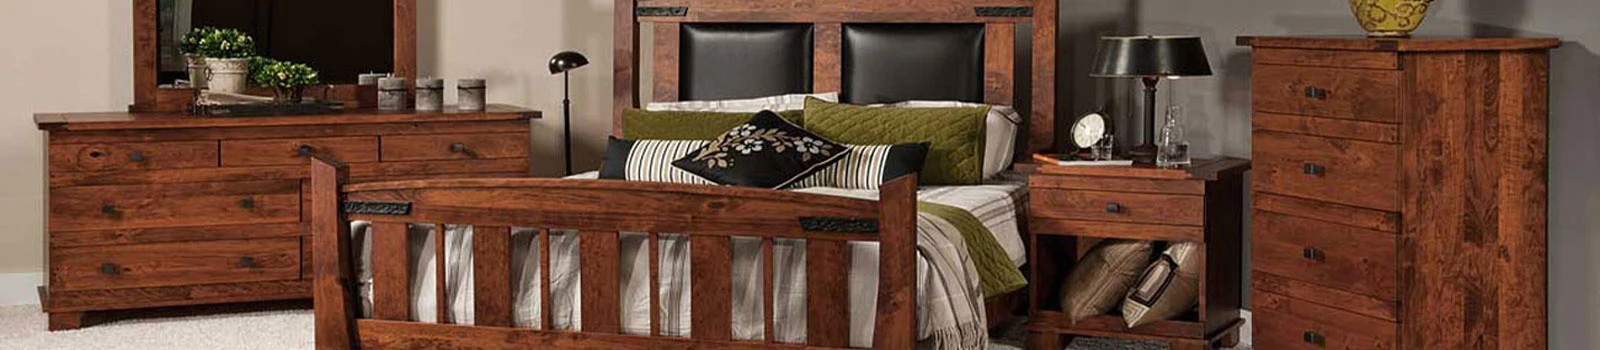 Discounted Price amish bedroom furniture